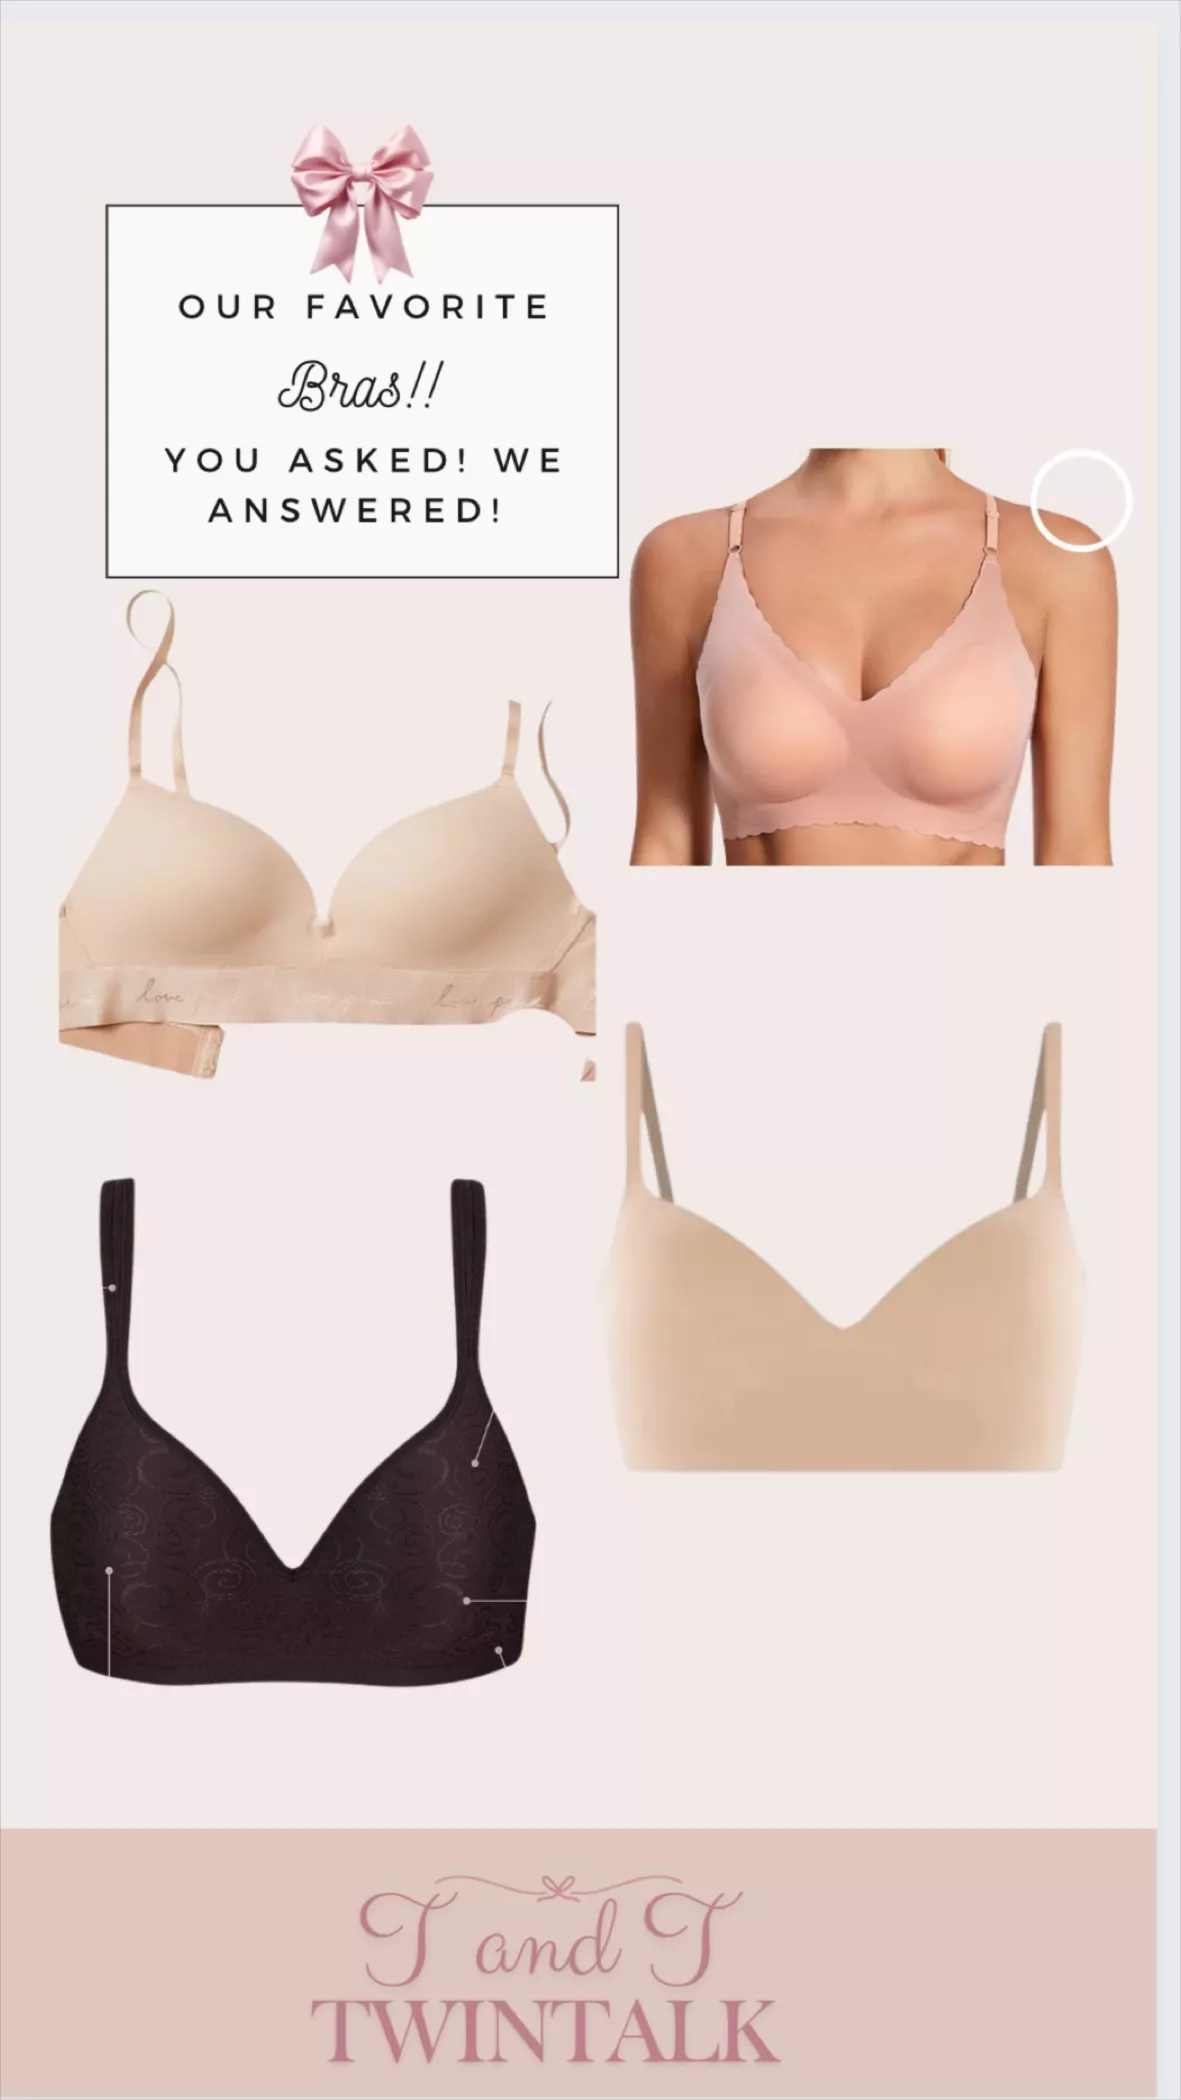 Bra SMN For You  BRAS \ Soft Cup Bras with Underwire BRAS \ ALL